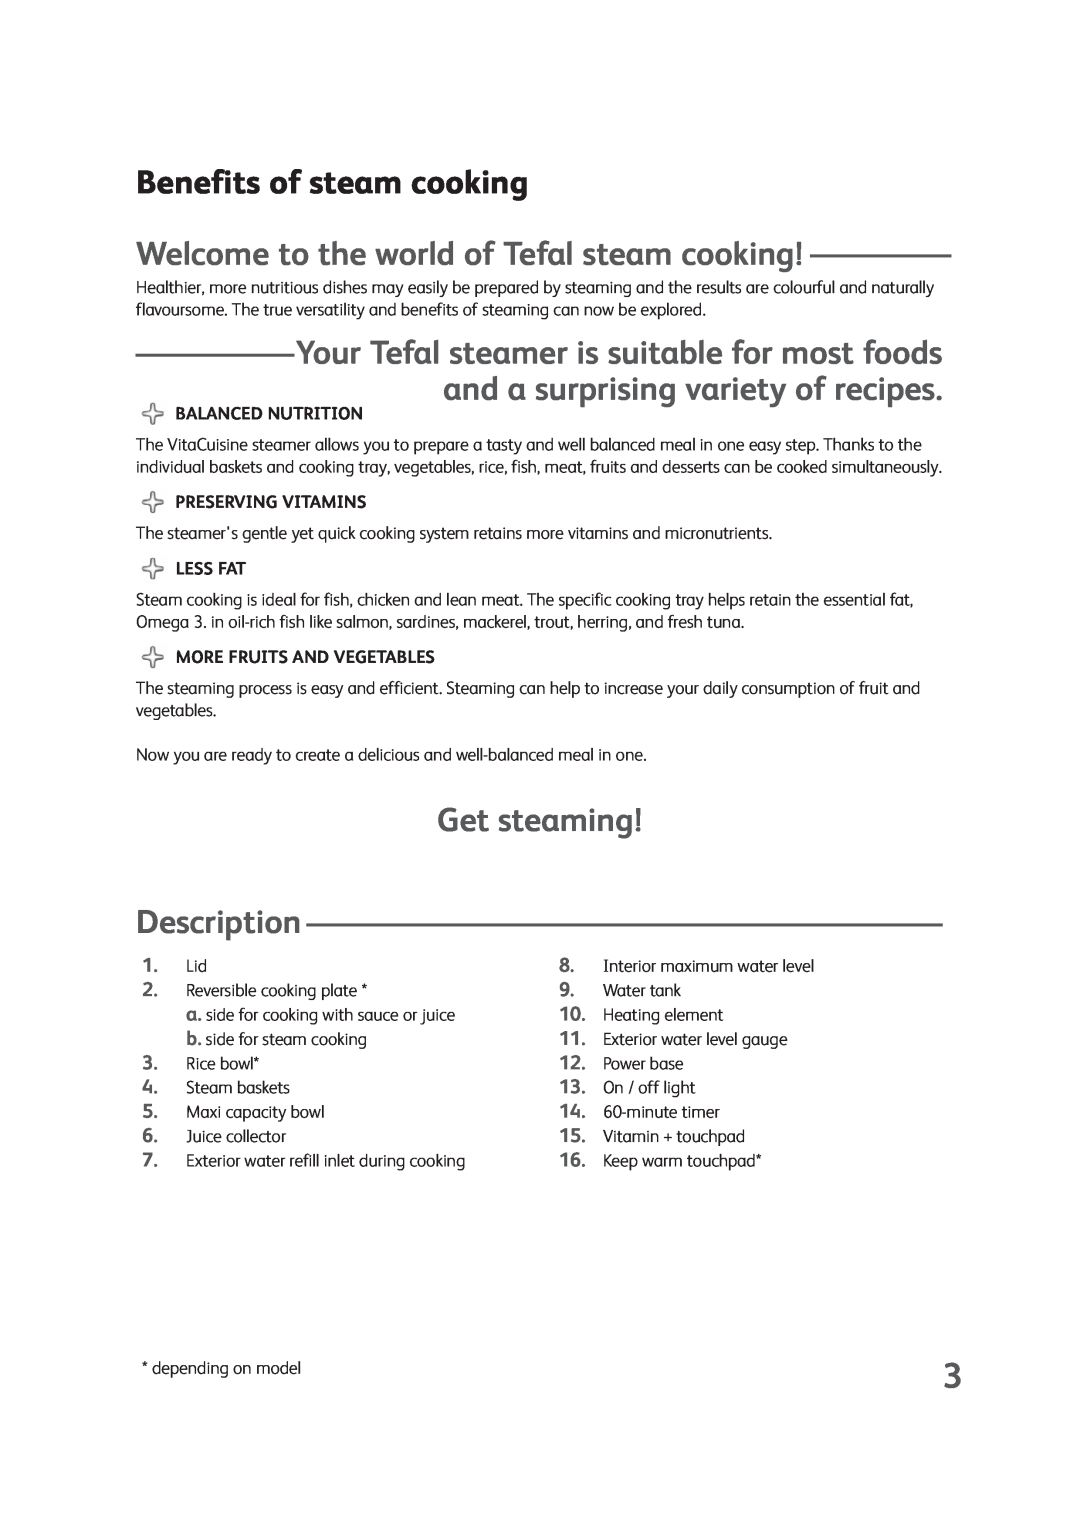 Groupe SEB USA - T-FAL VS4001 Benefits of steam cooking, Welcome to the world of Tefal steam cooking, Balanced Nutrition 